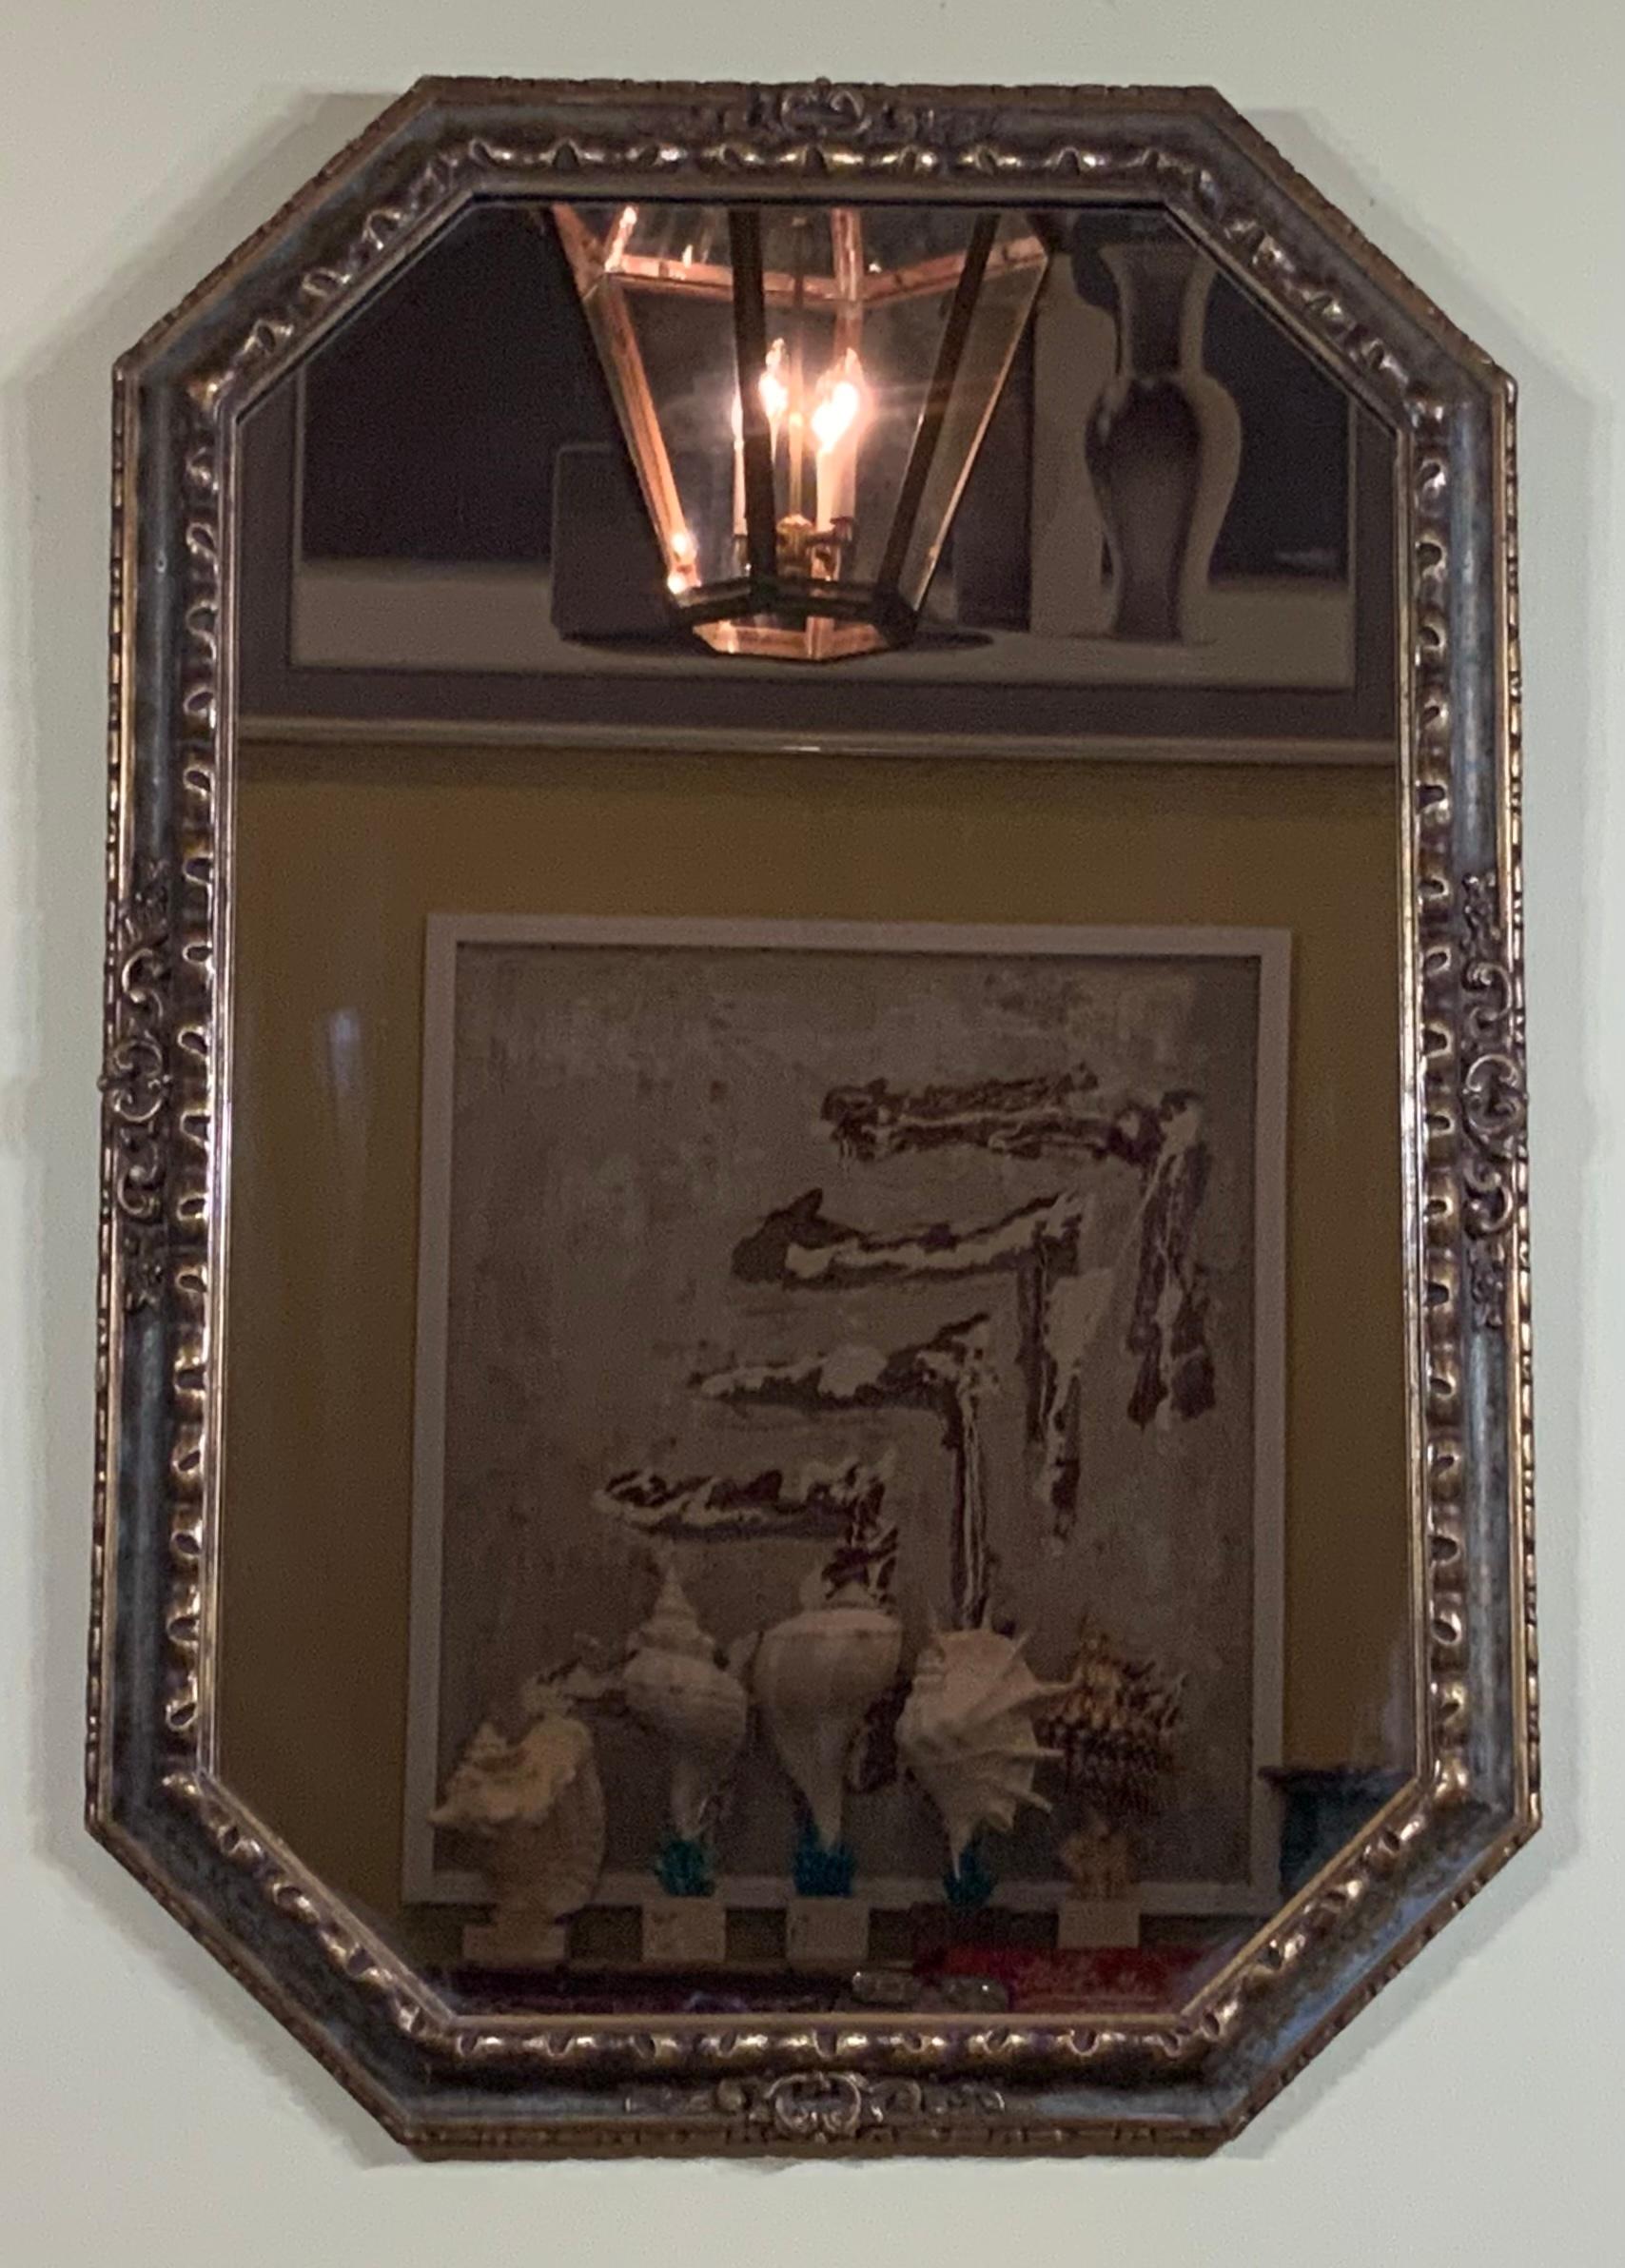 elegant antique mirror, hand crafted in Italy circa 1960 in octagon shape. the mirror features are scrolled molding around the frame and almost Invisible hand painting of vines.
The mirror is in very good condition. 
Beautiful elegant mirror for